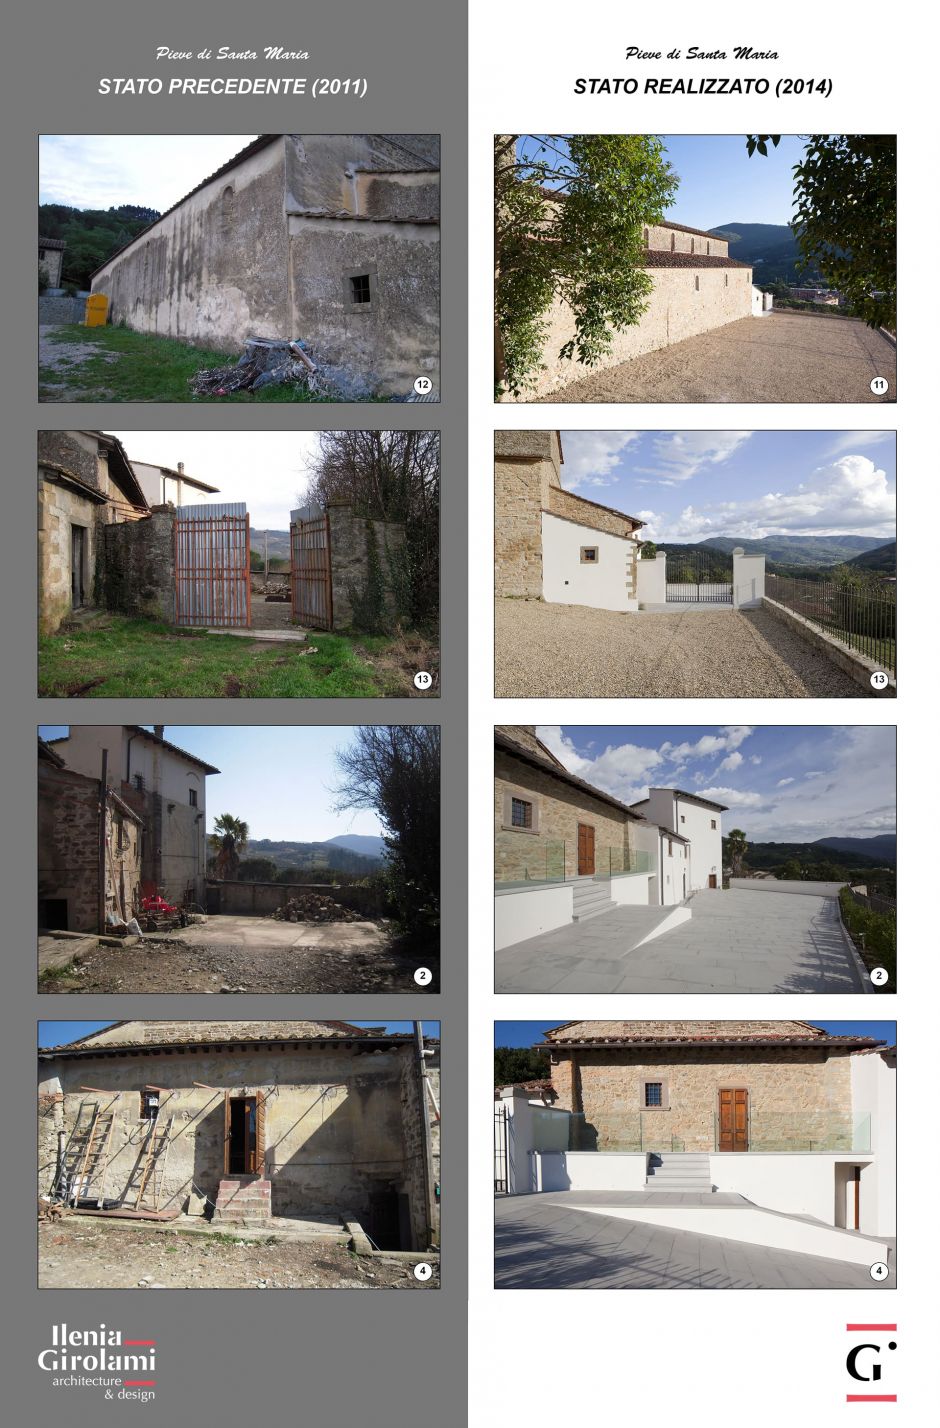 PAT - Prize for Architecture in Tuscany